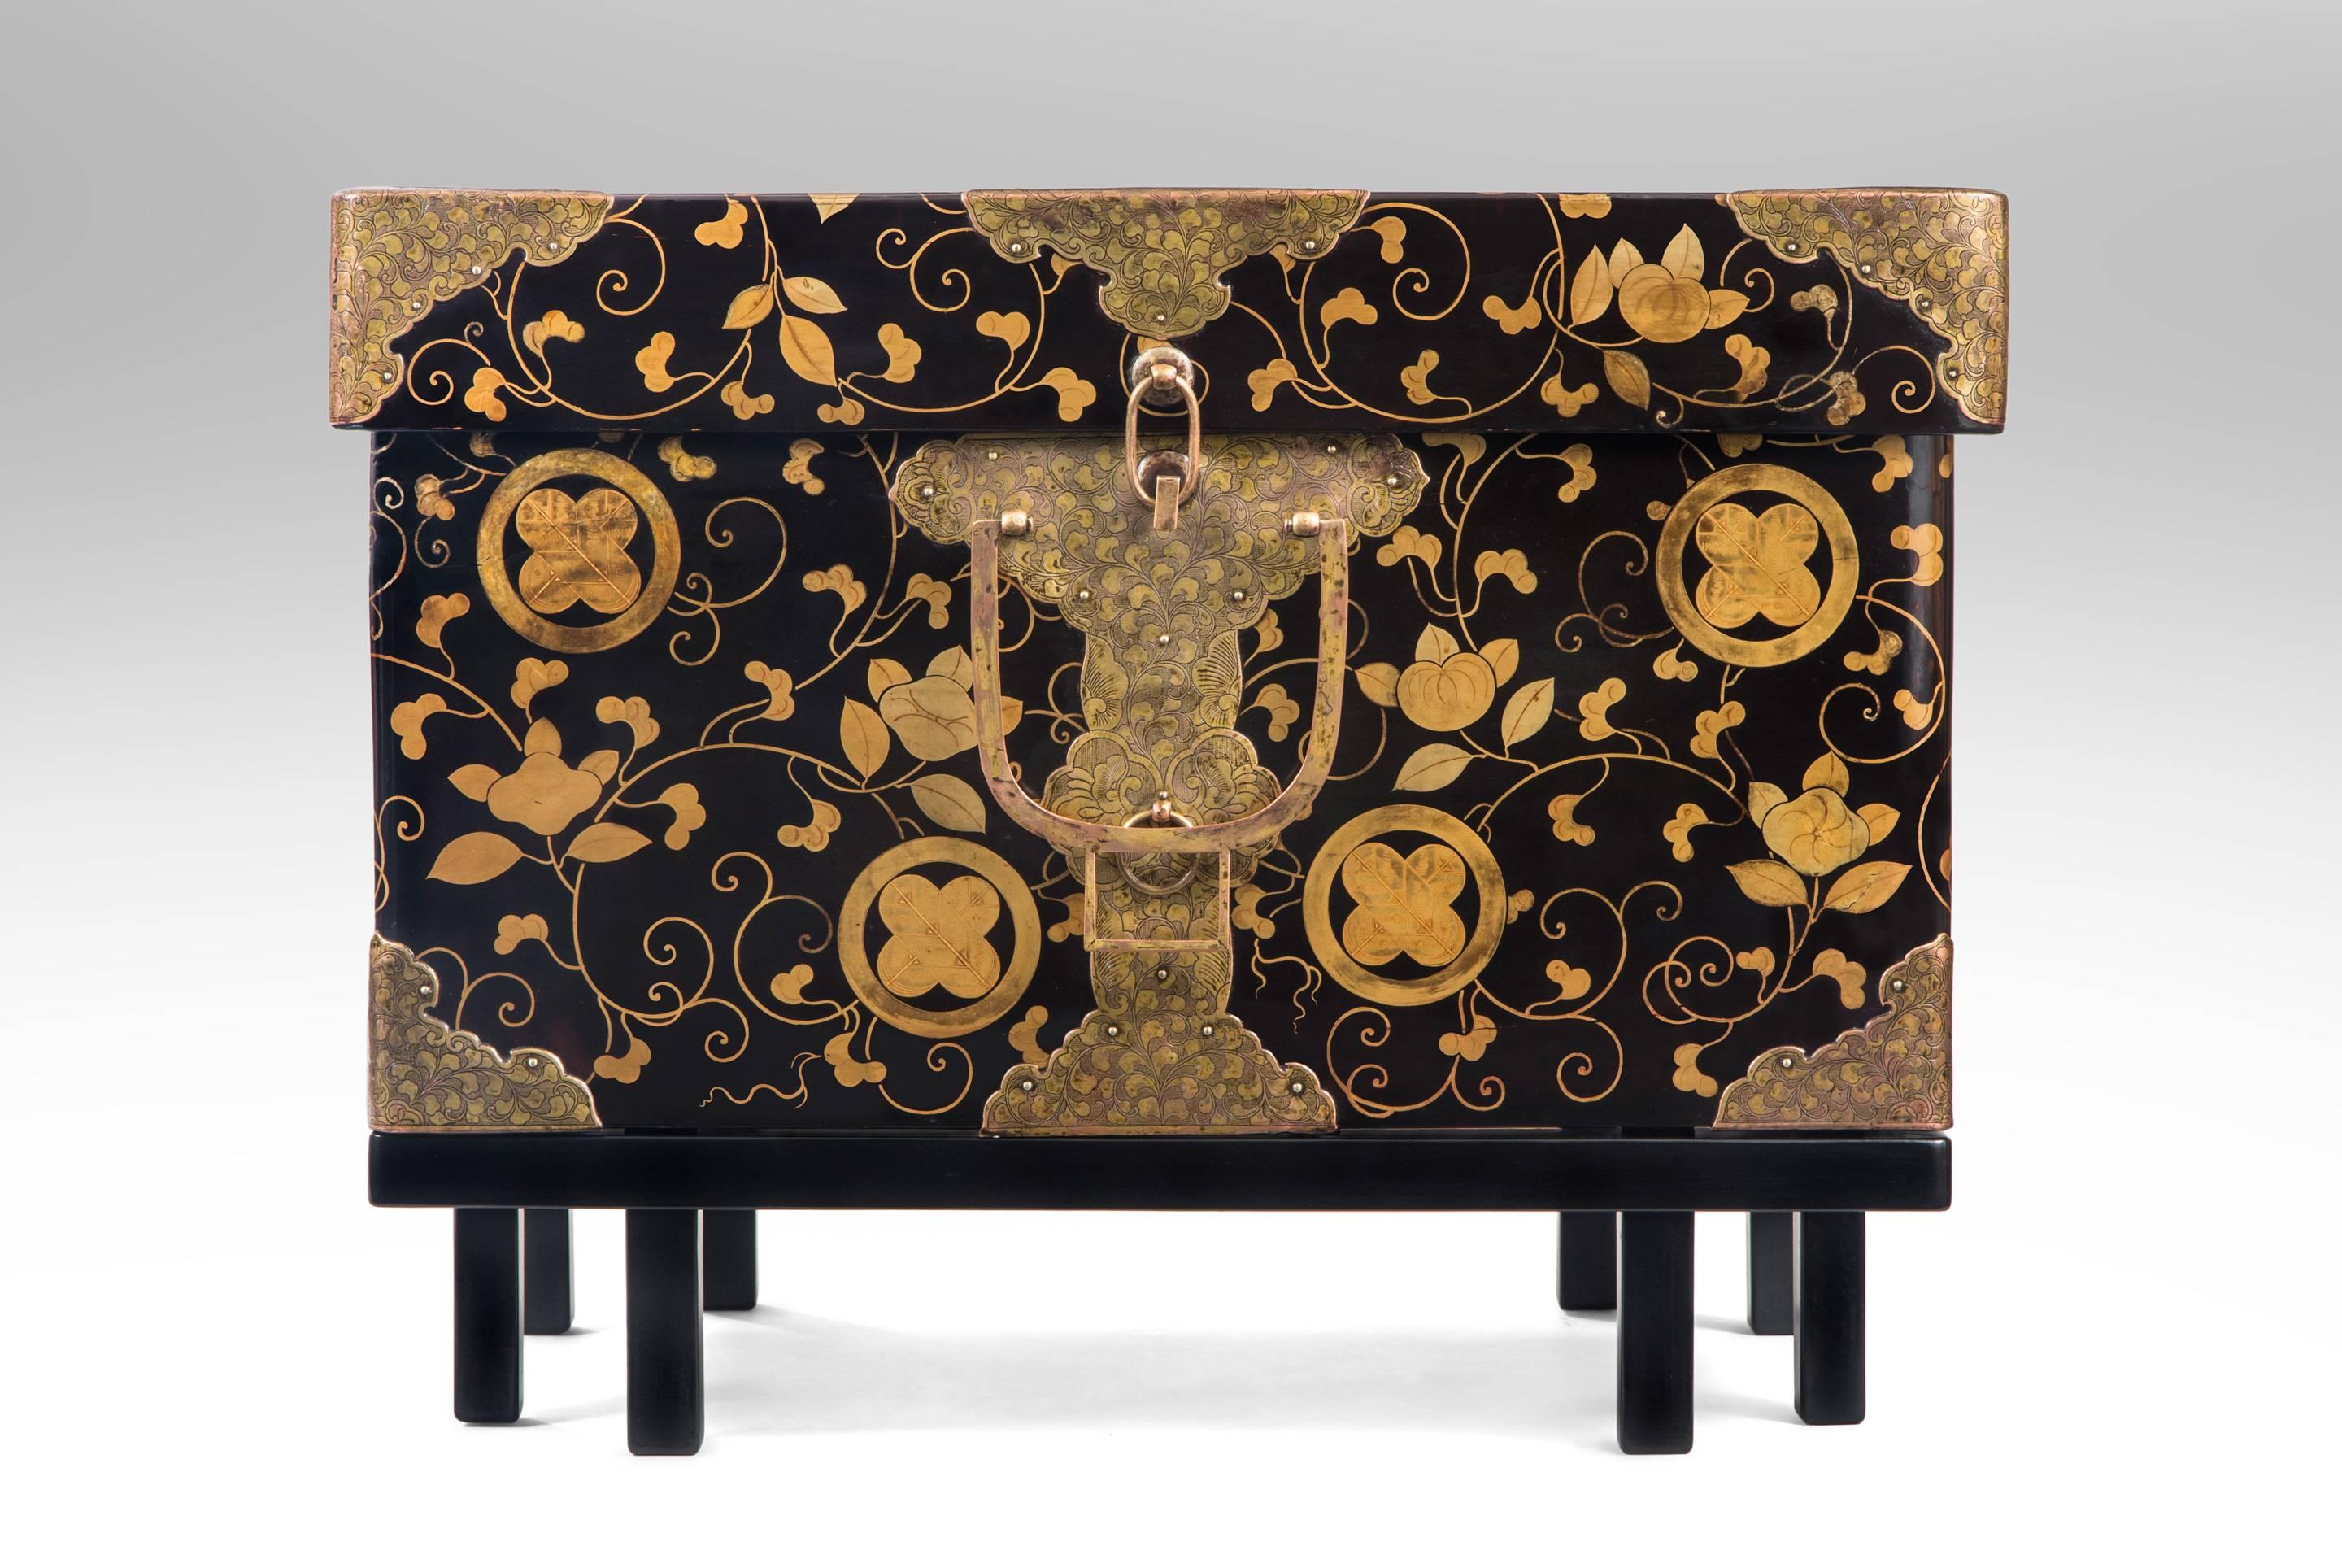 19th Century Japanese Gilt Metal Mounted and Lacquer Hasami-Bako (Robe Chest / Box) For Sale